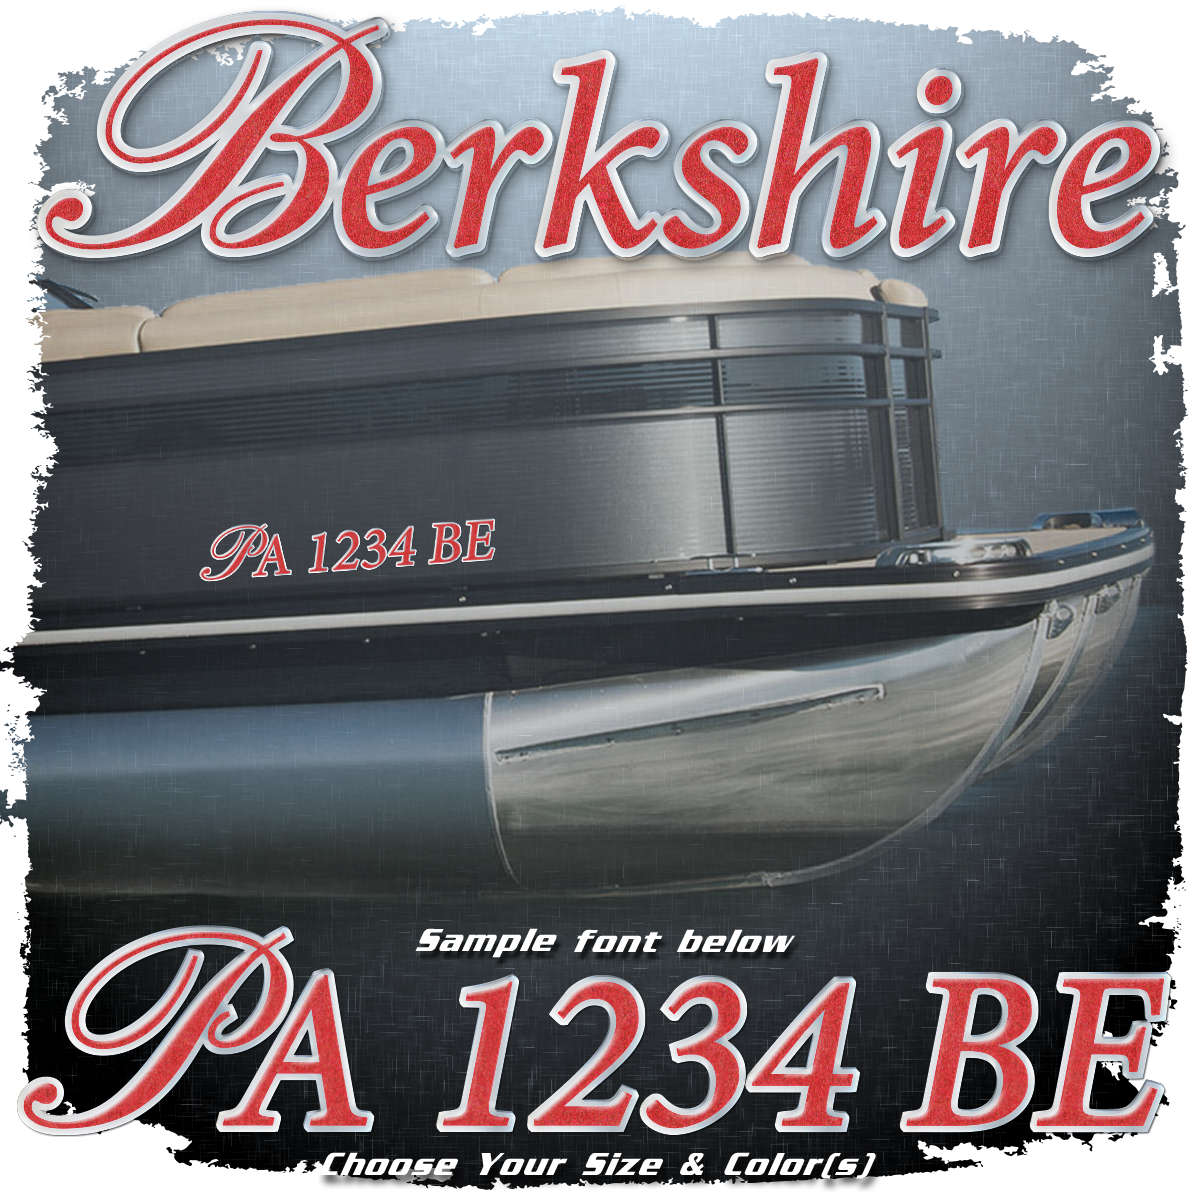 Berkshire Logo Style #1 Registration (2 included), Choose Your Own Colors